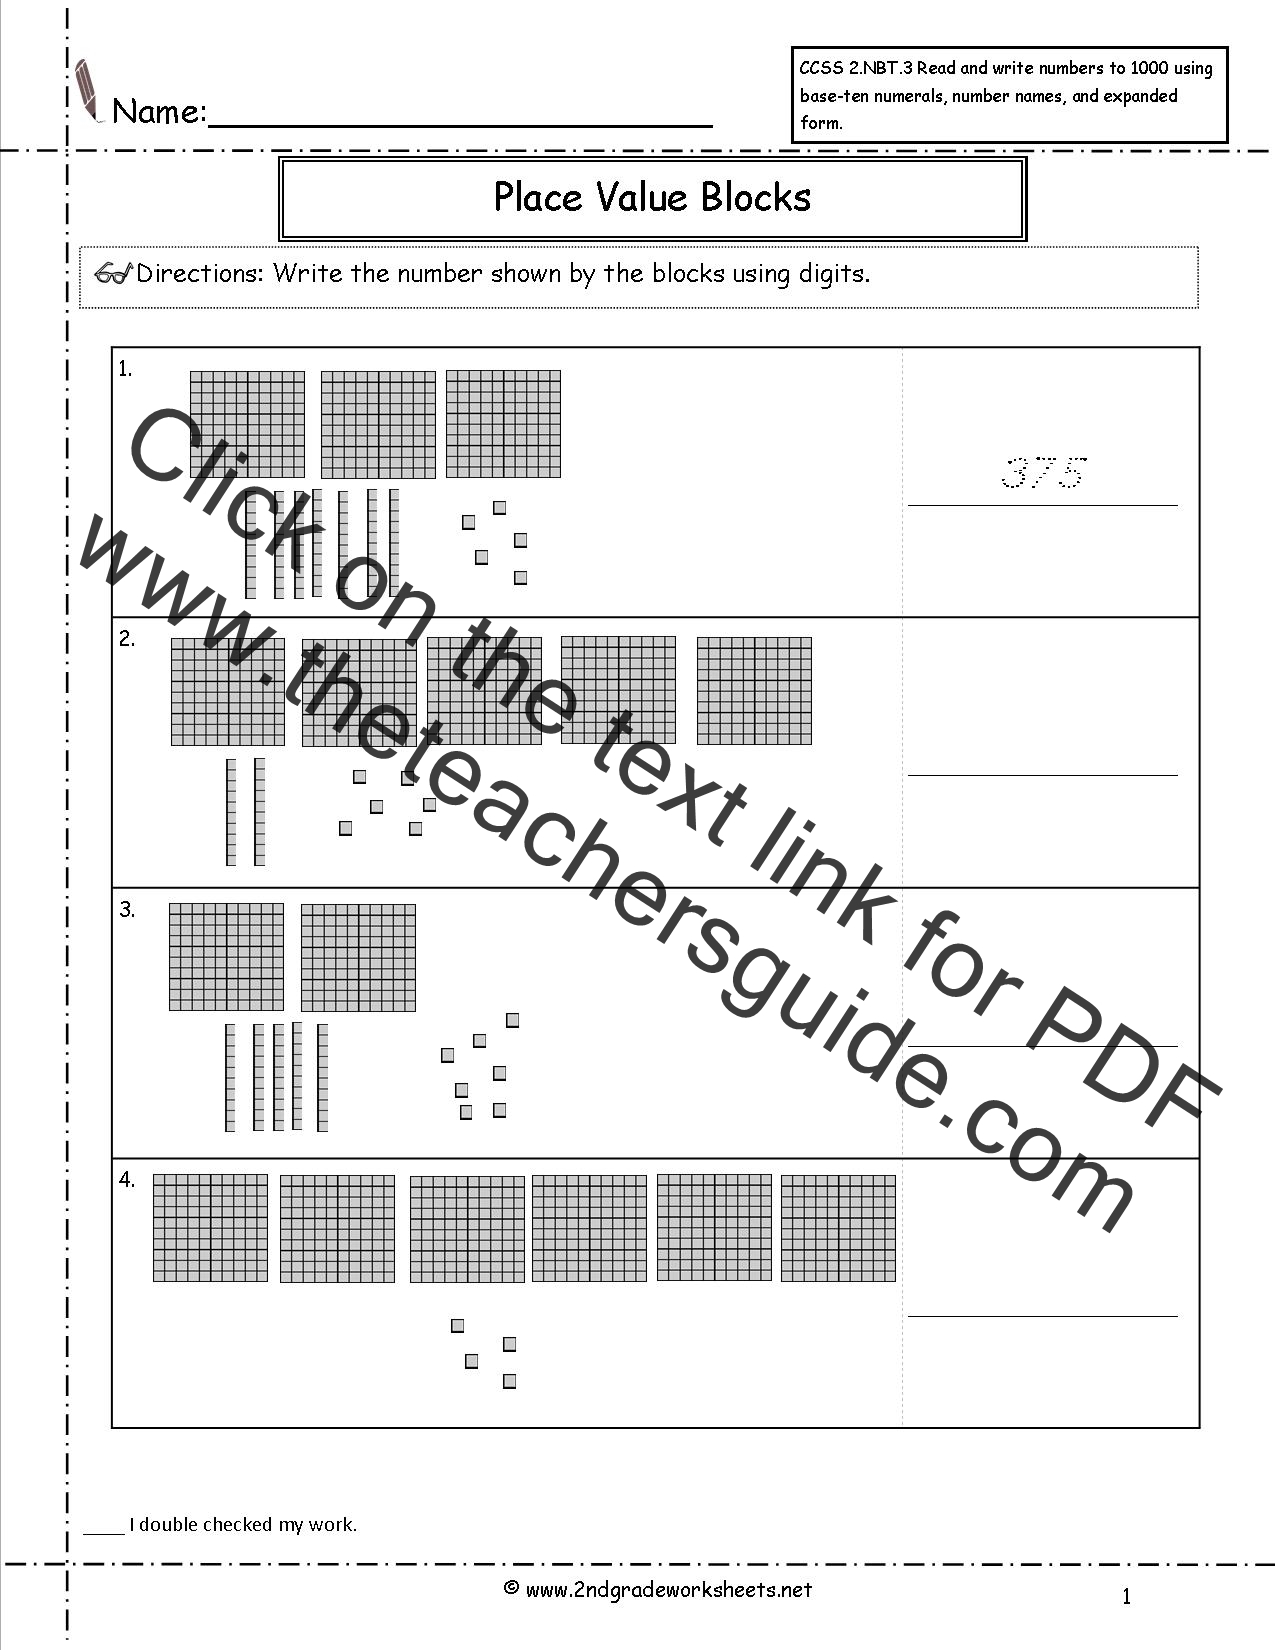 CCSS 2.NBT.3 Worksheets. Place Value Worksheets-Read and Write Numbers